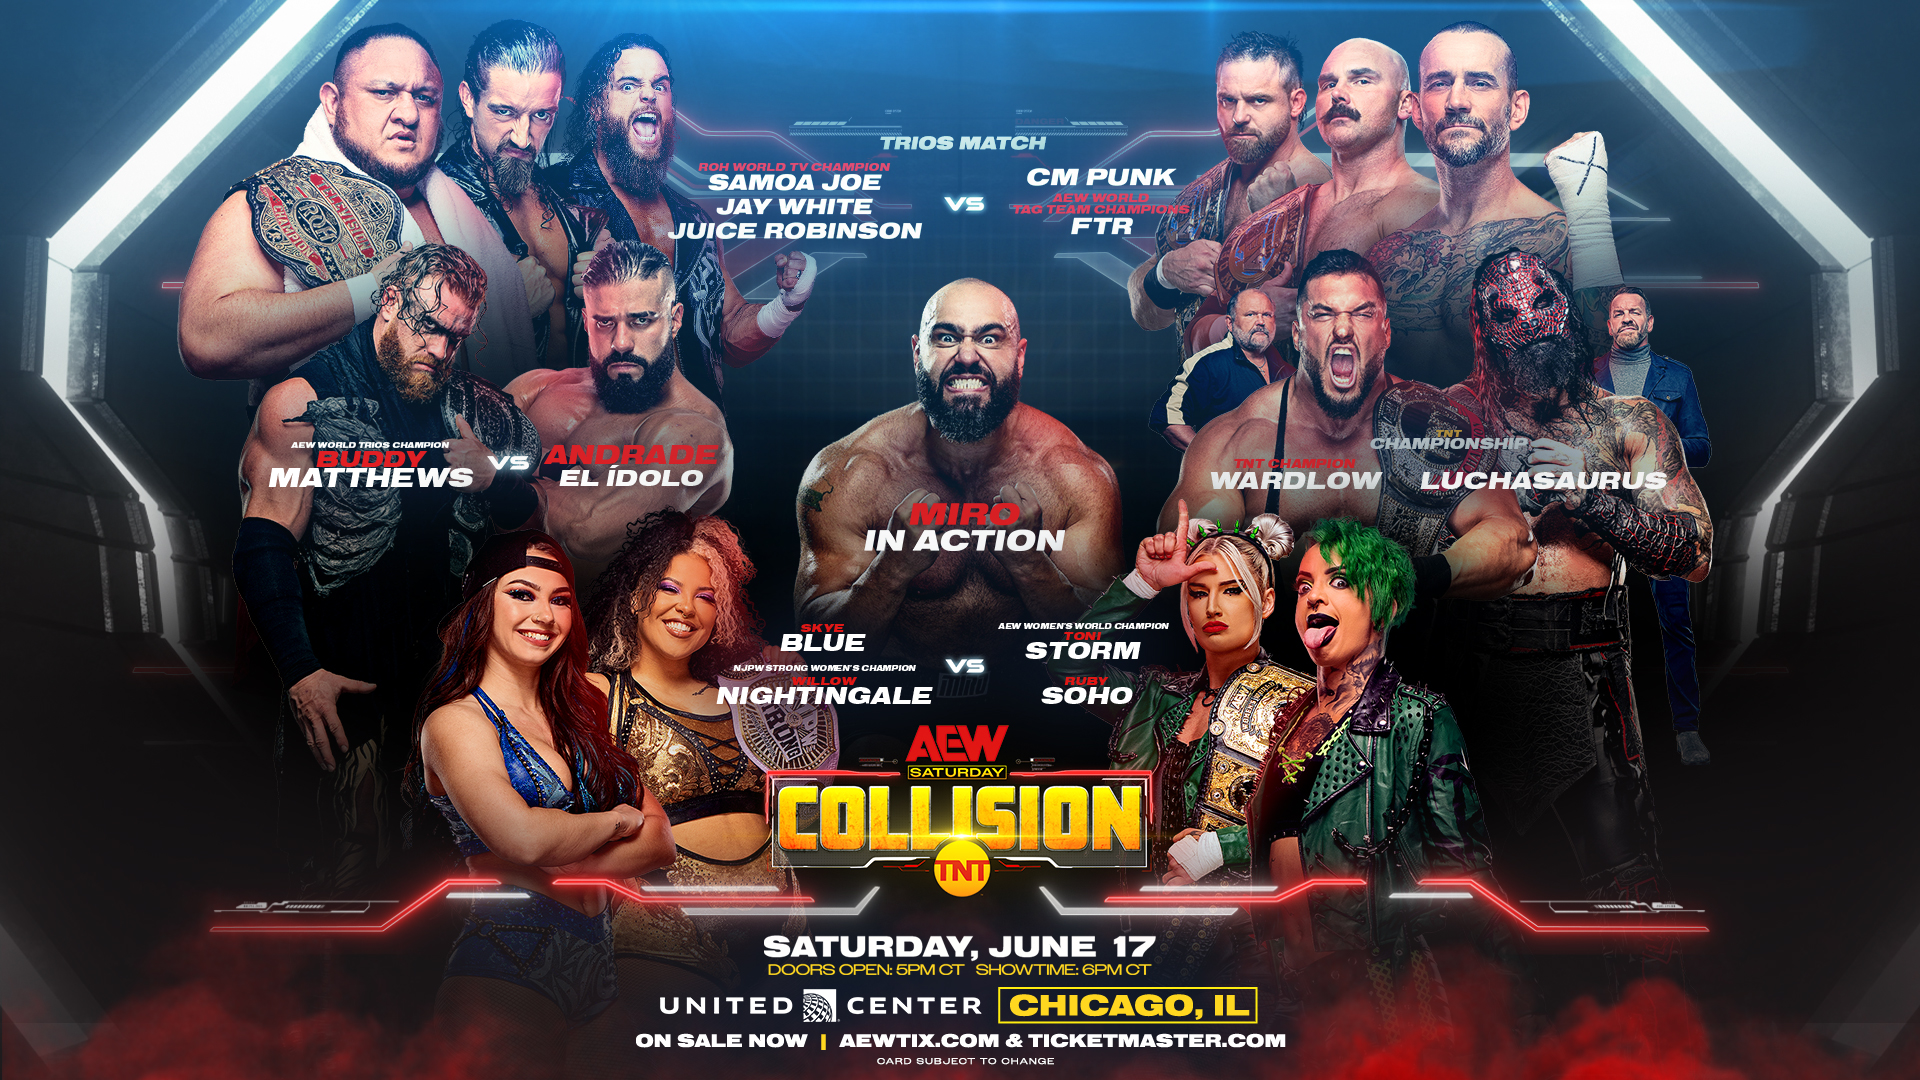 Match graphic for the debut episode of AEW Collision.